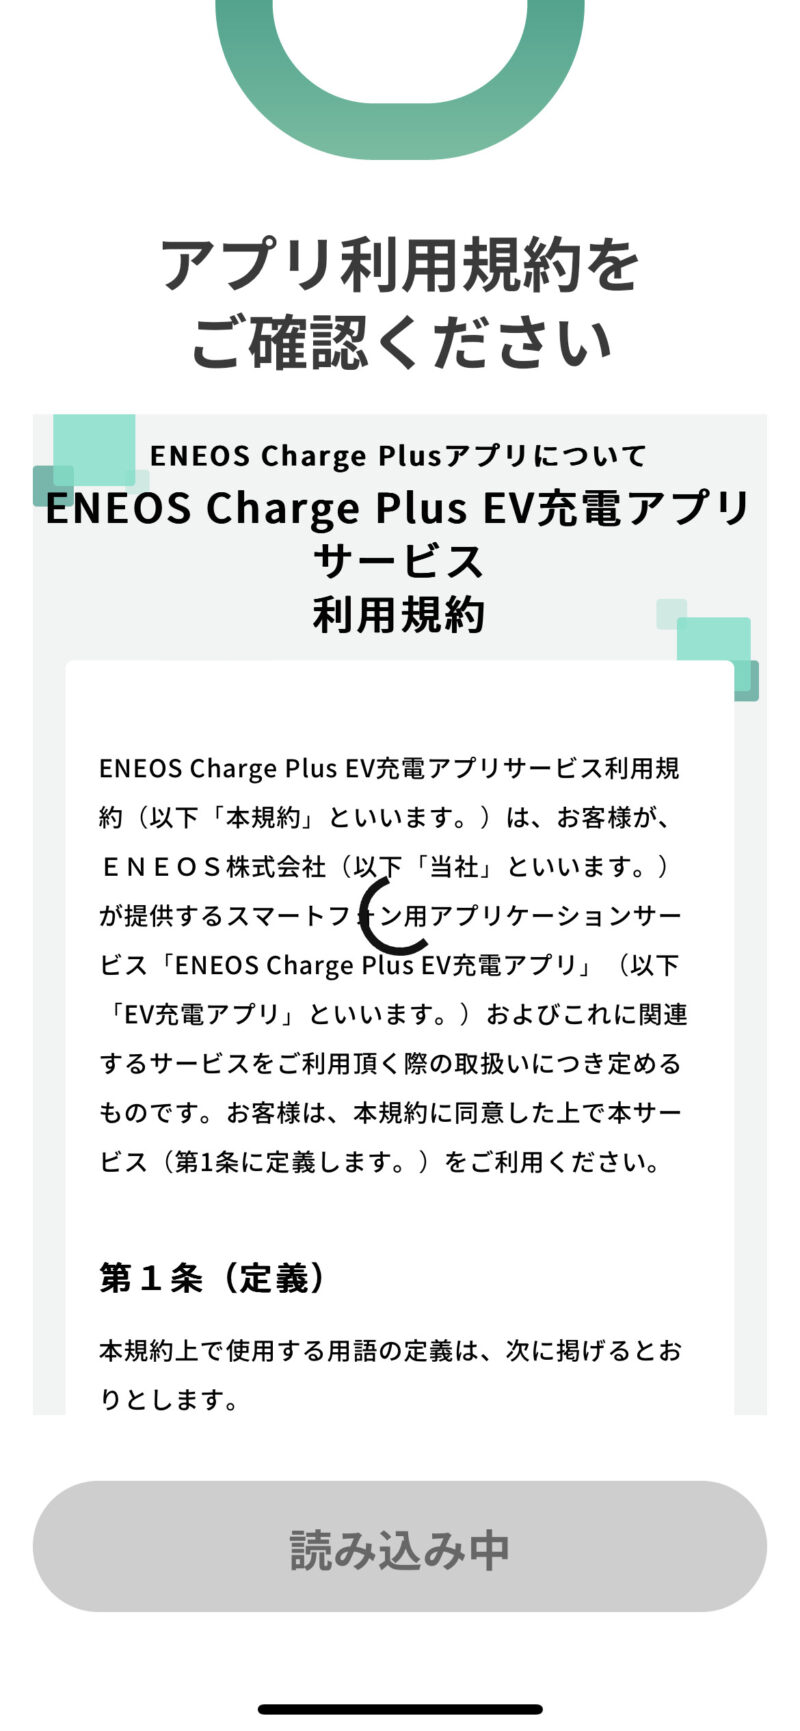 ENEOS Charge Plus利用規約確認画面